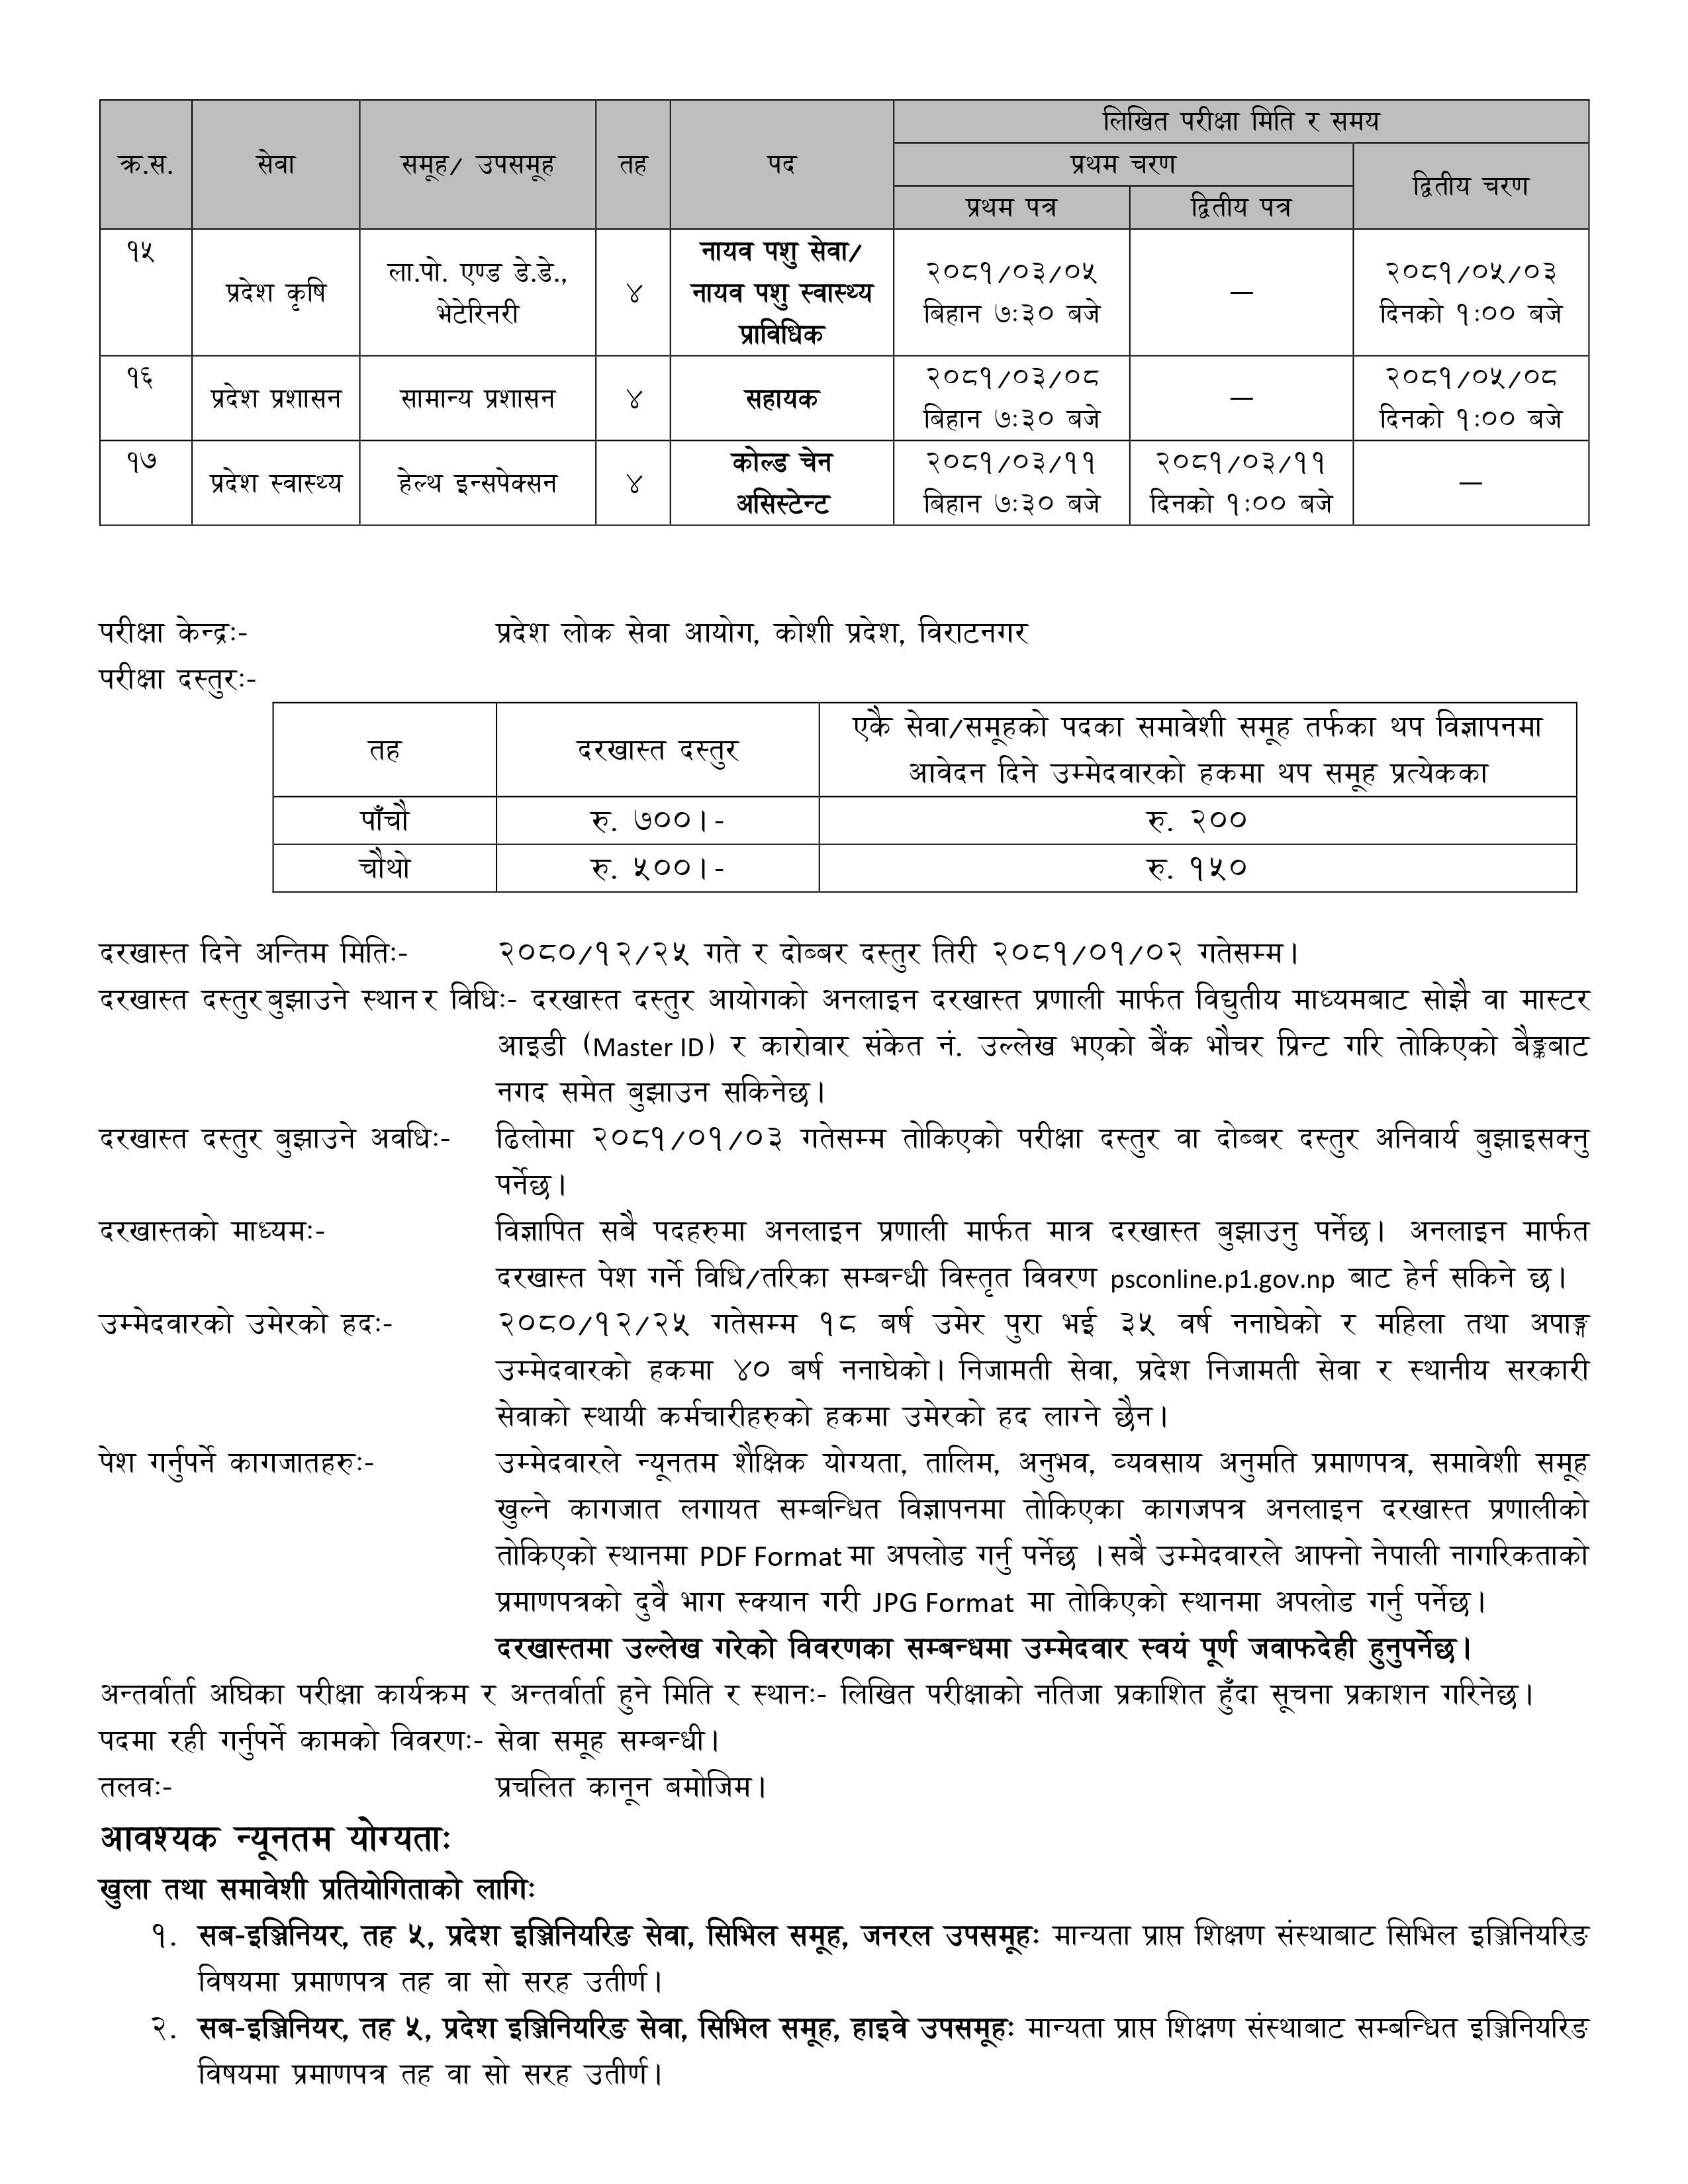 Vacancies For Assistant 5th and 4th Level of Koshi Province 2080-12-05